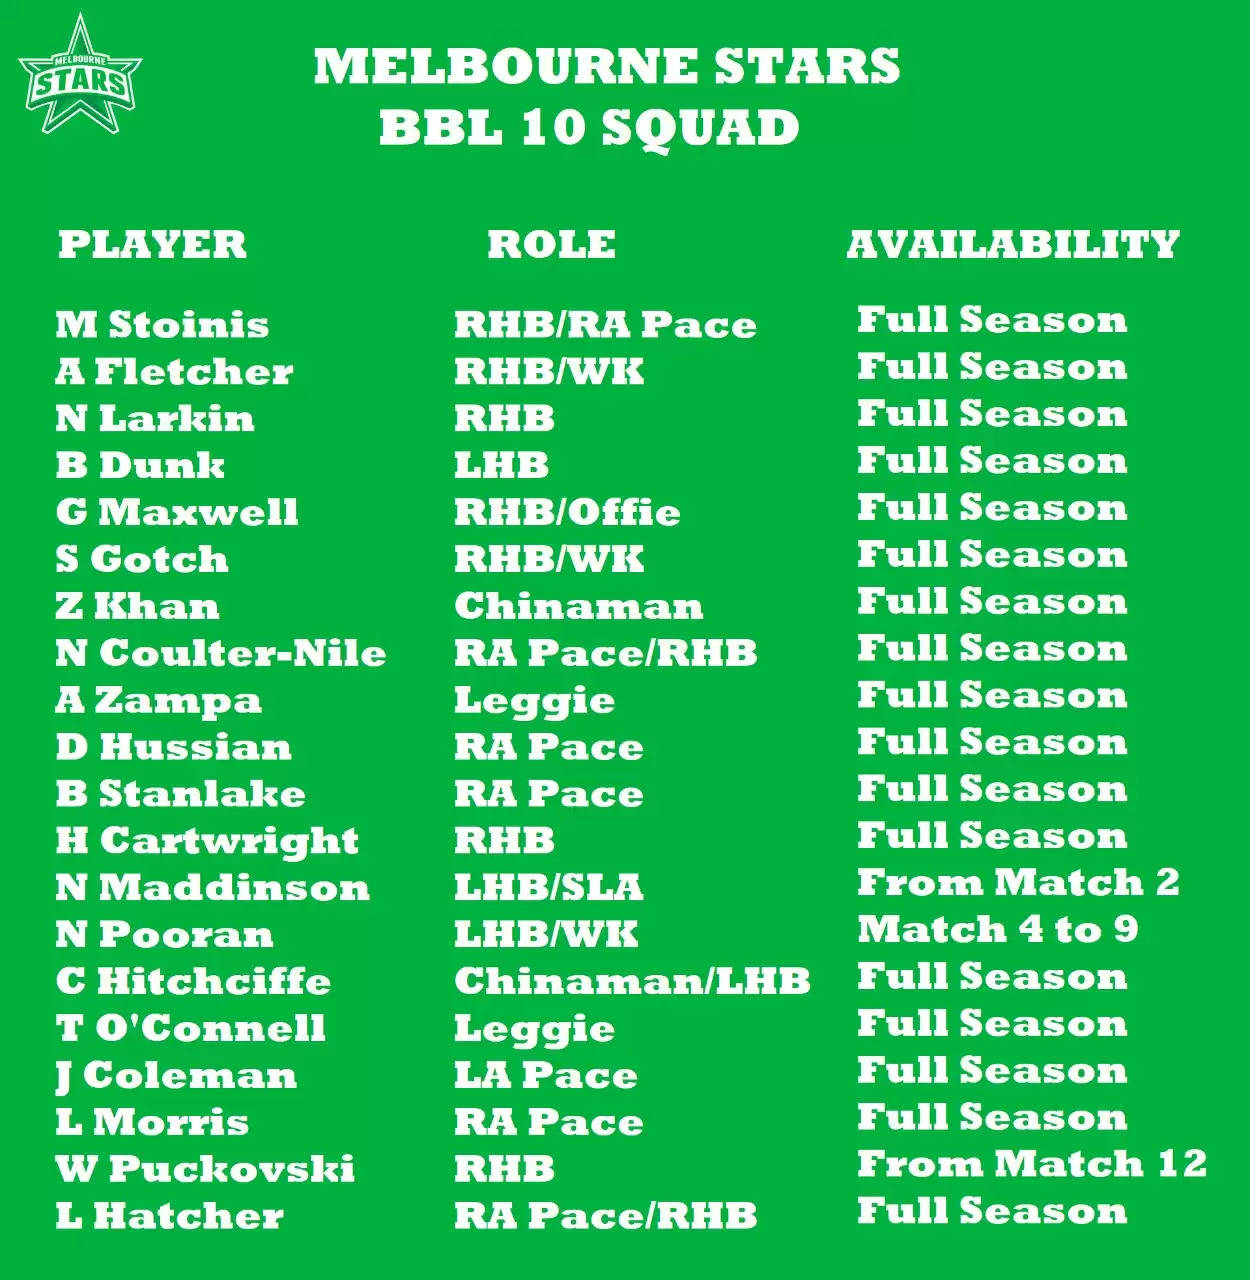 BBL 10: Melbourne Stars Team Preview, Squad And Fantasy Cheat Sheet For Big Bash League 2020-21 Season